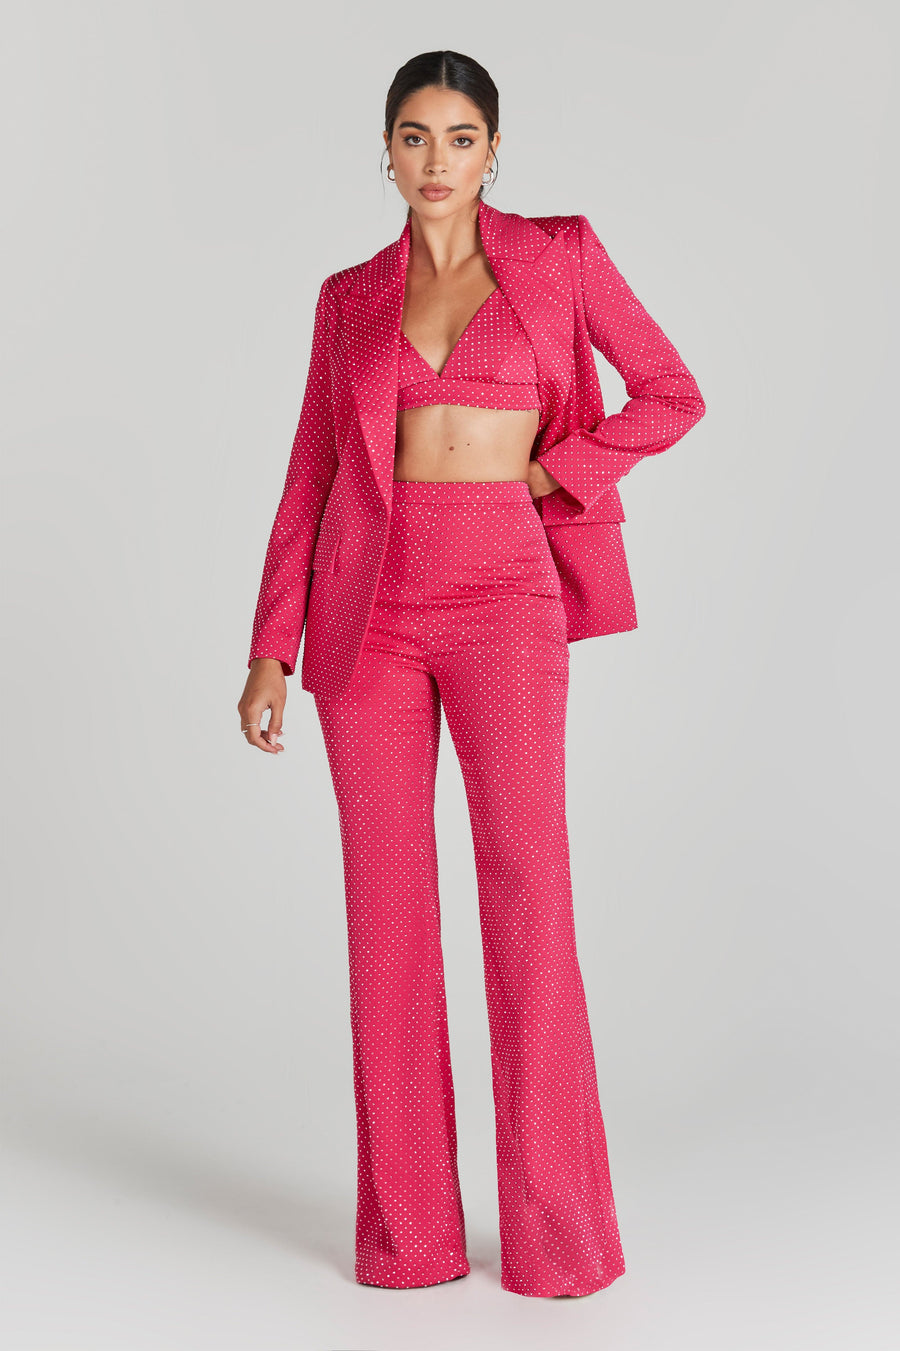 Occasion Suits & Co-ords – NADINE MERABI